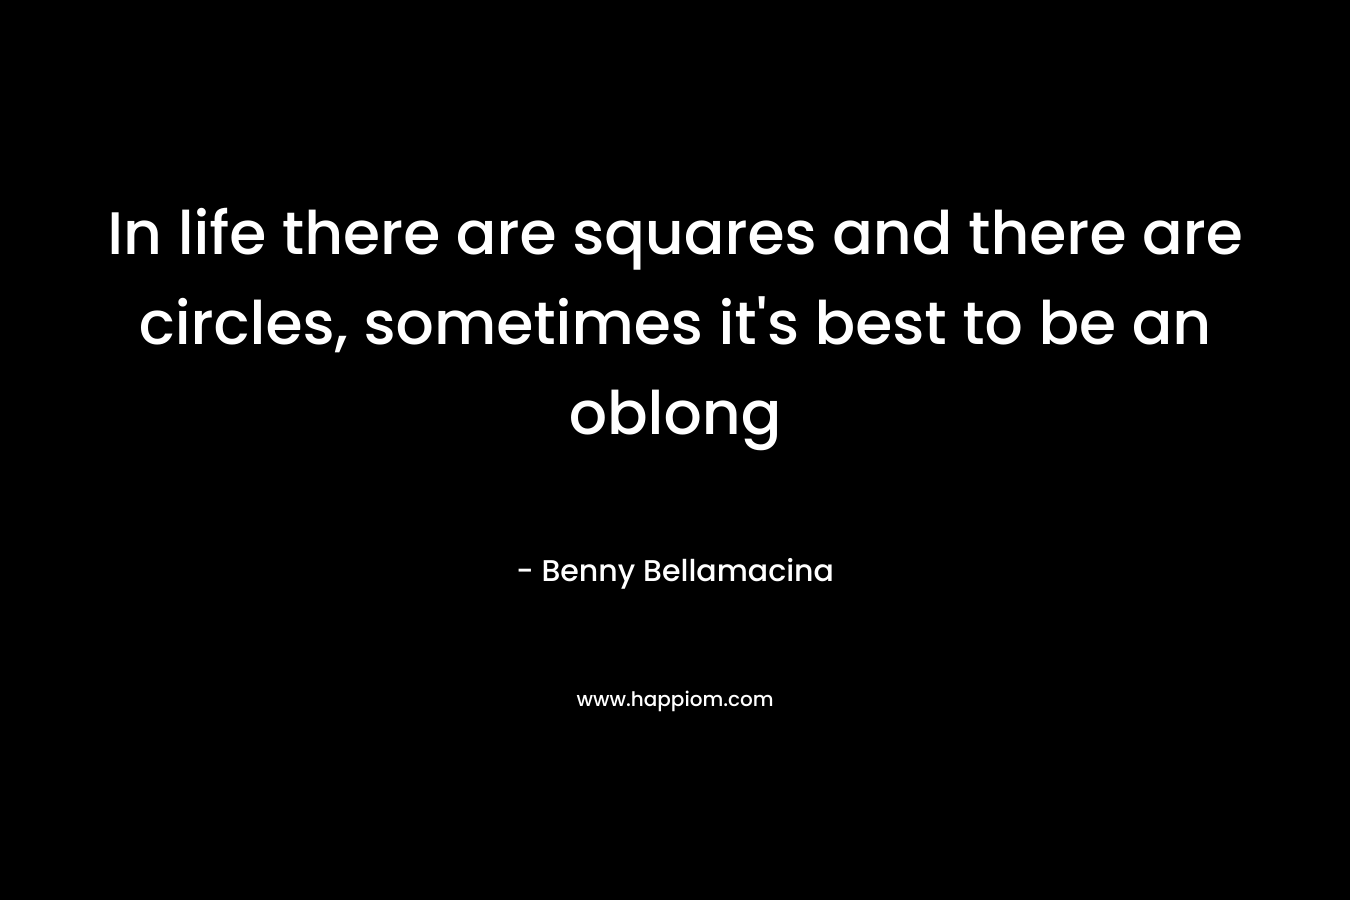 In life there are squares and there are circles, sometimes it's best to be an oblong